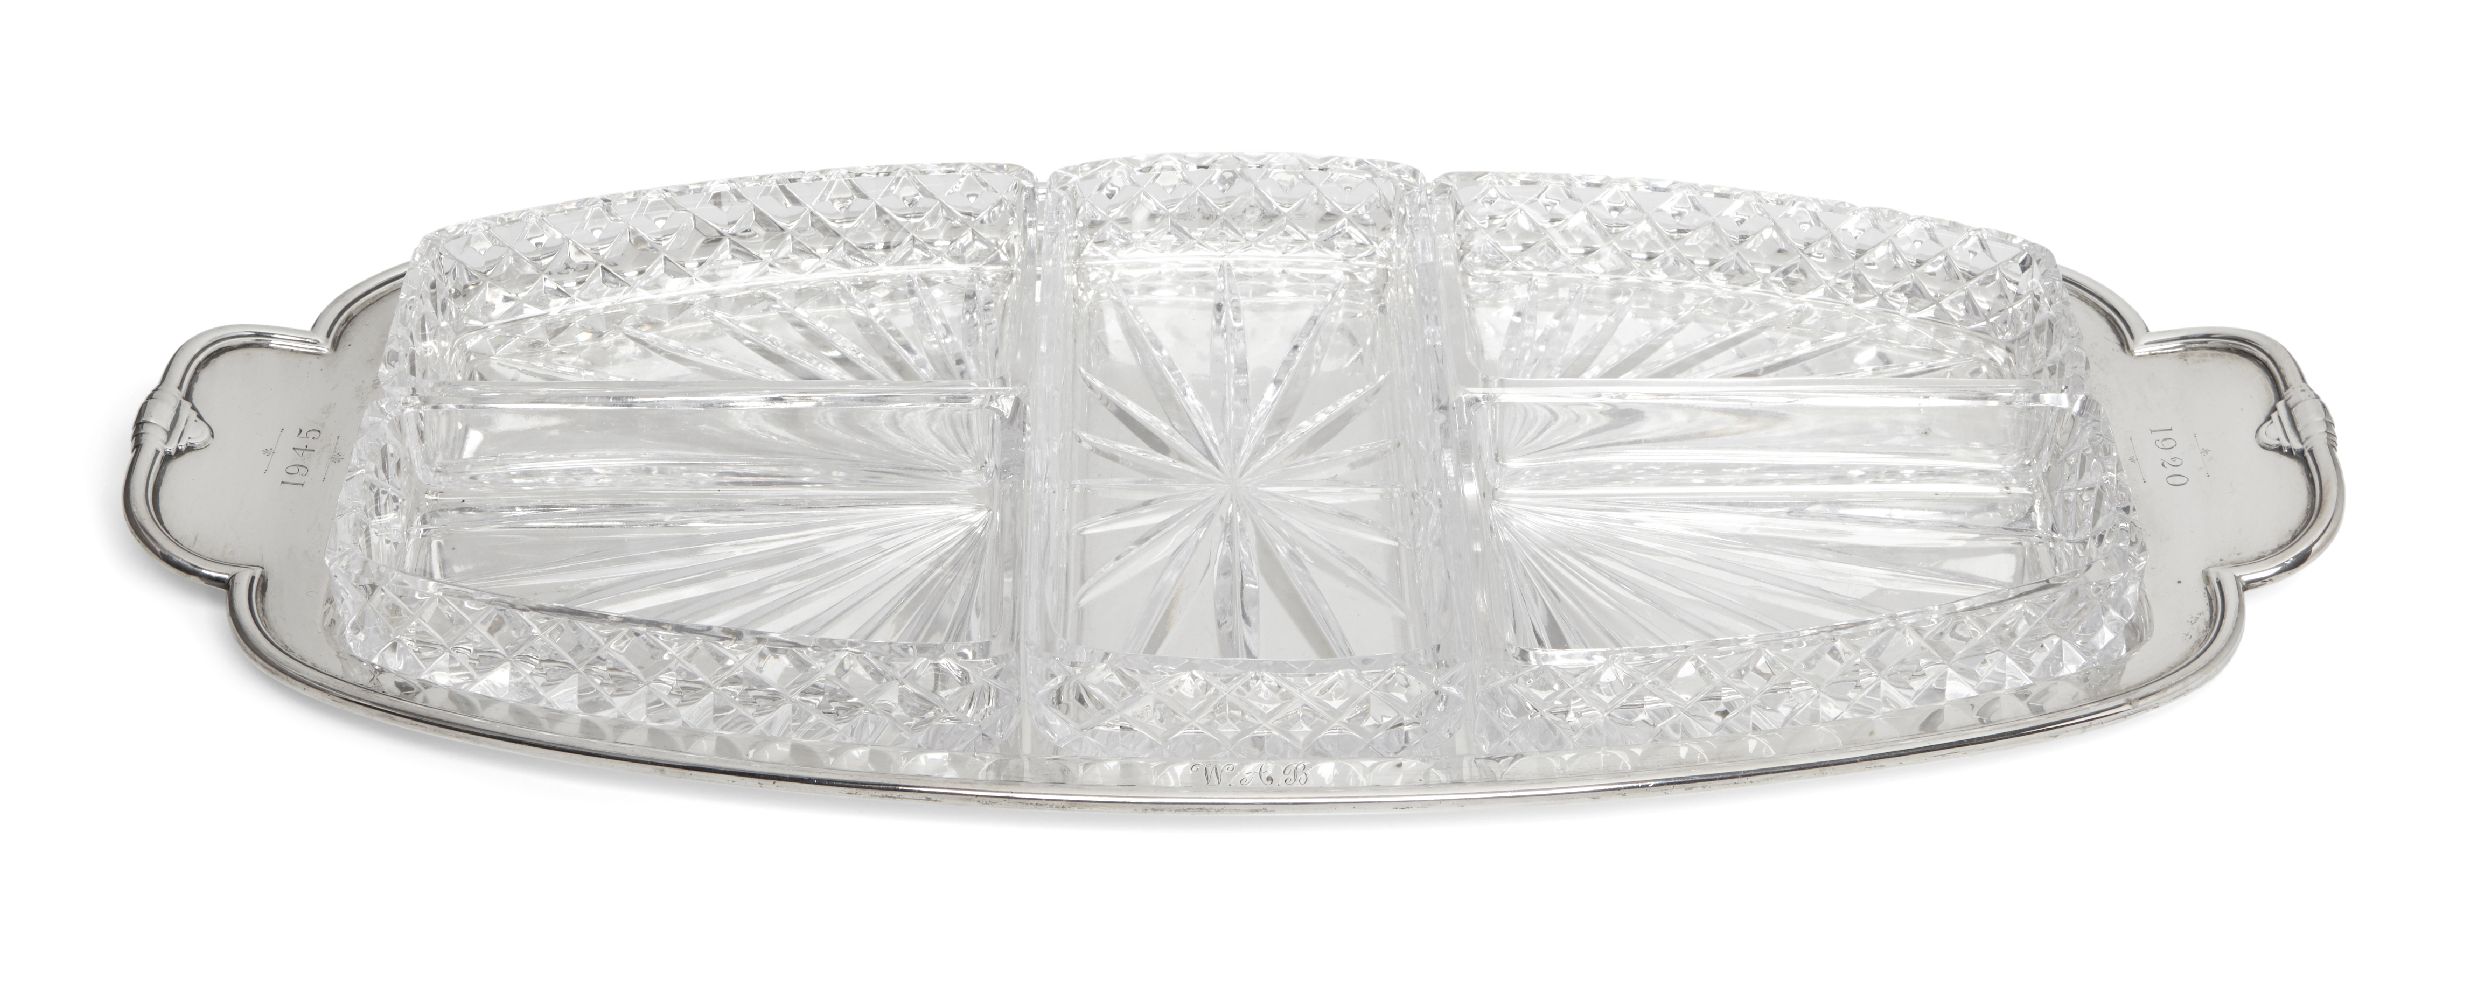 A silver and glass hors d'oeuvres dish, Sheffield. c.1943, Frank Cobb & Co Ltd., of shaped, oblong